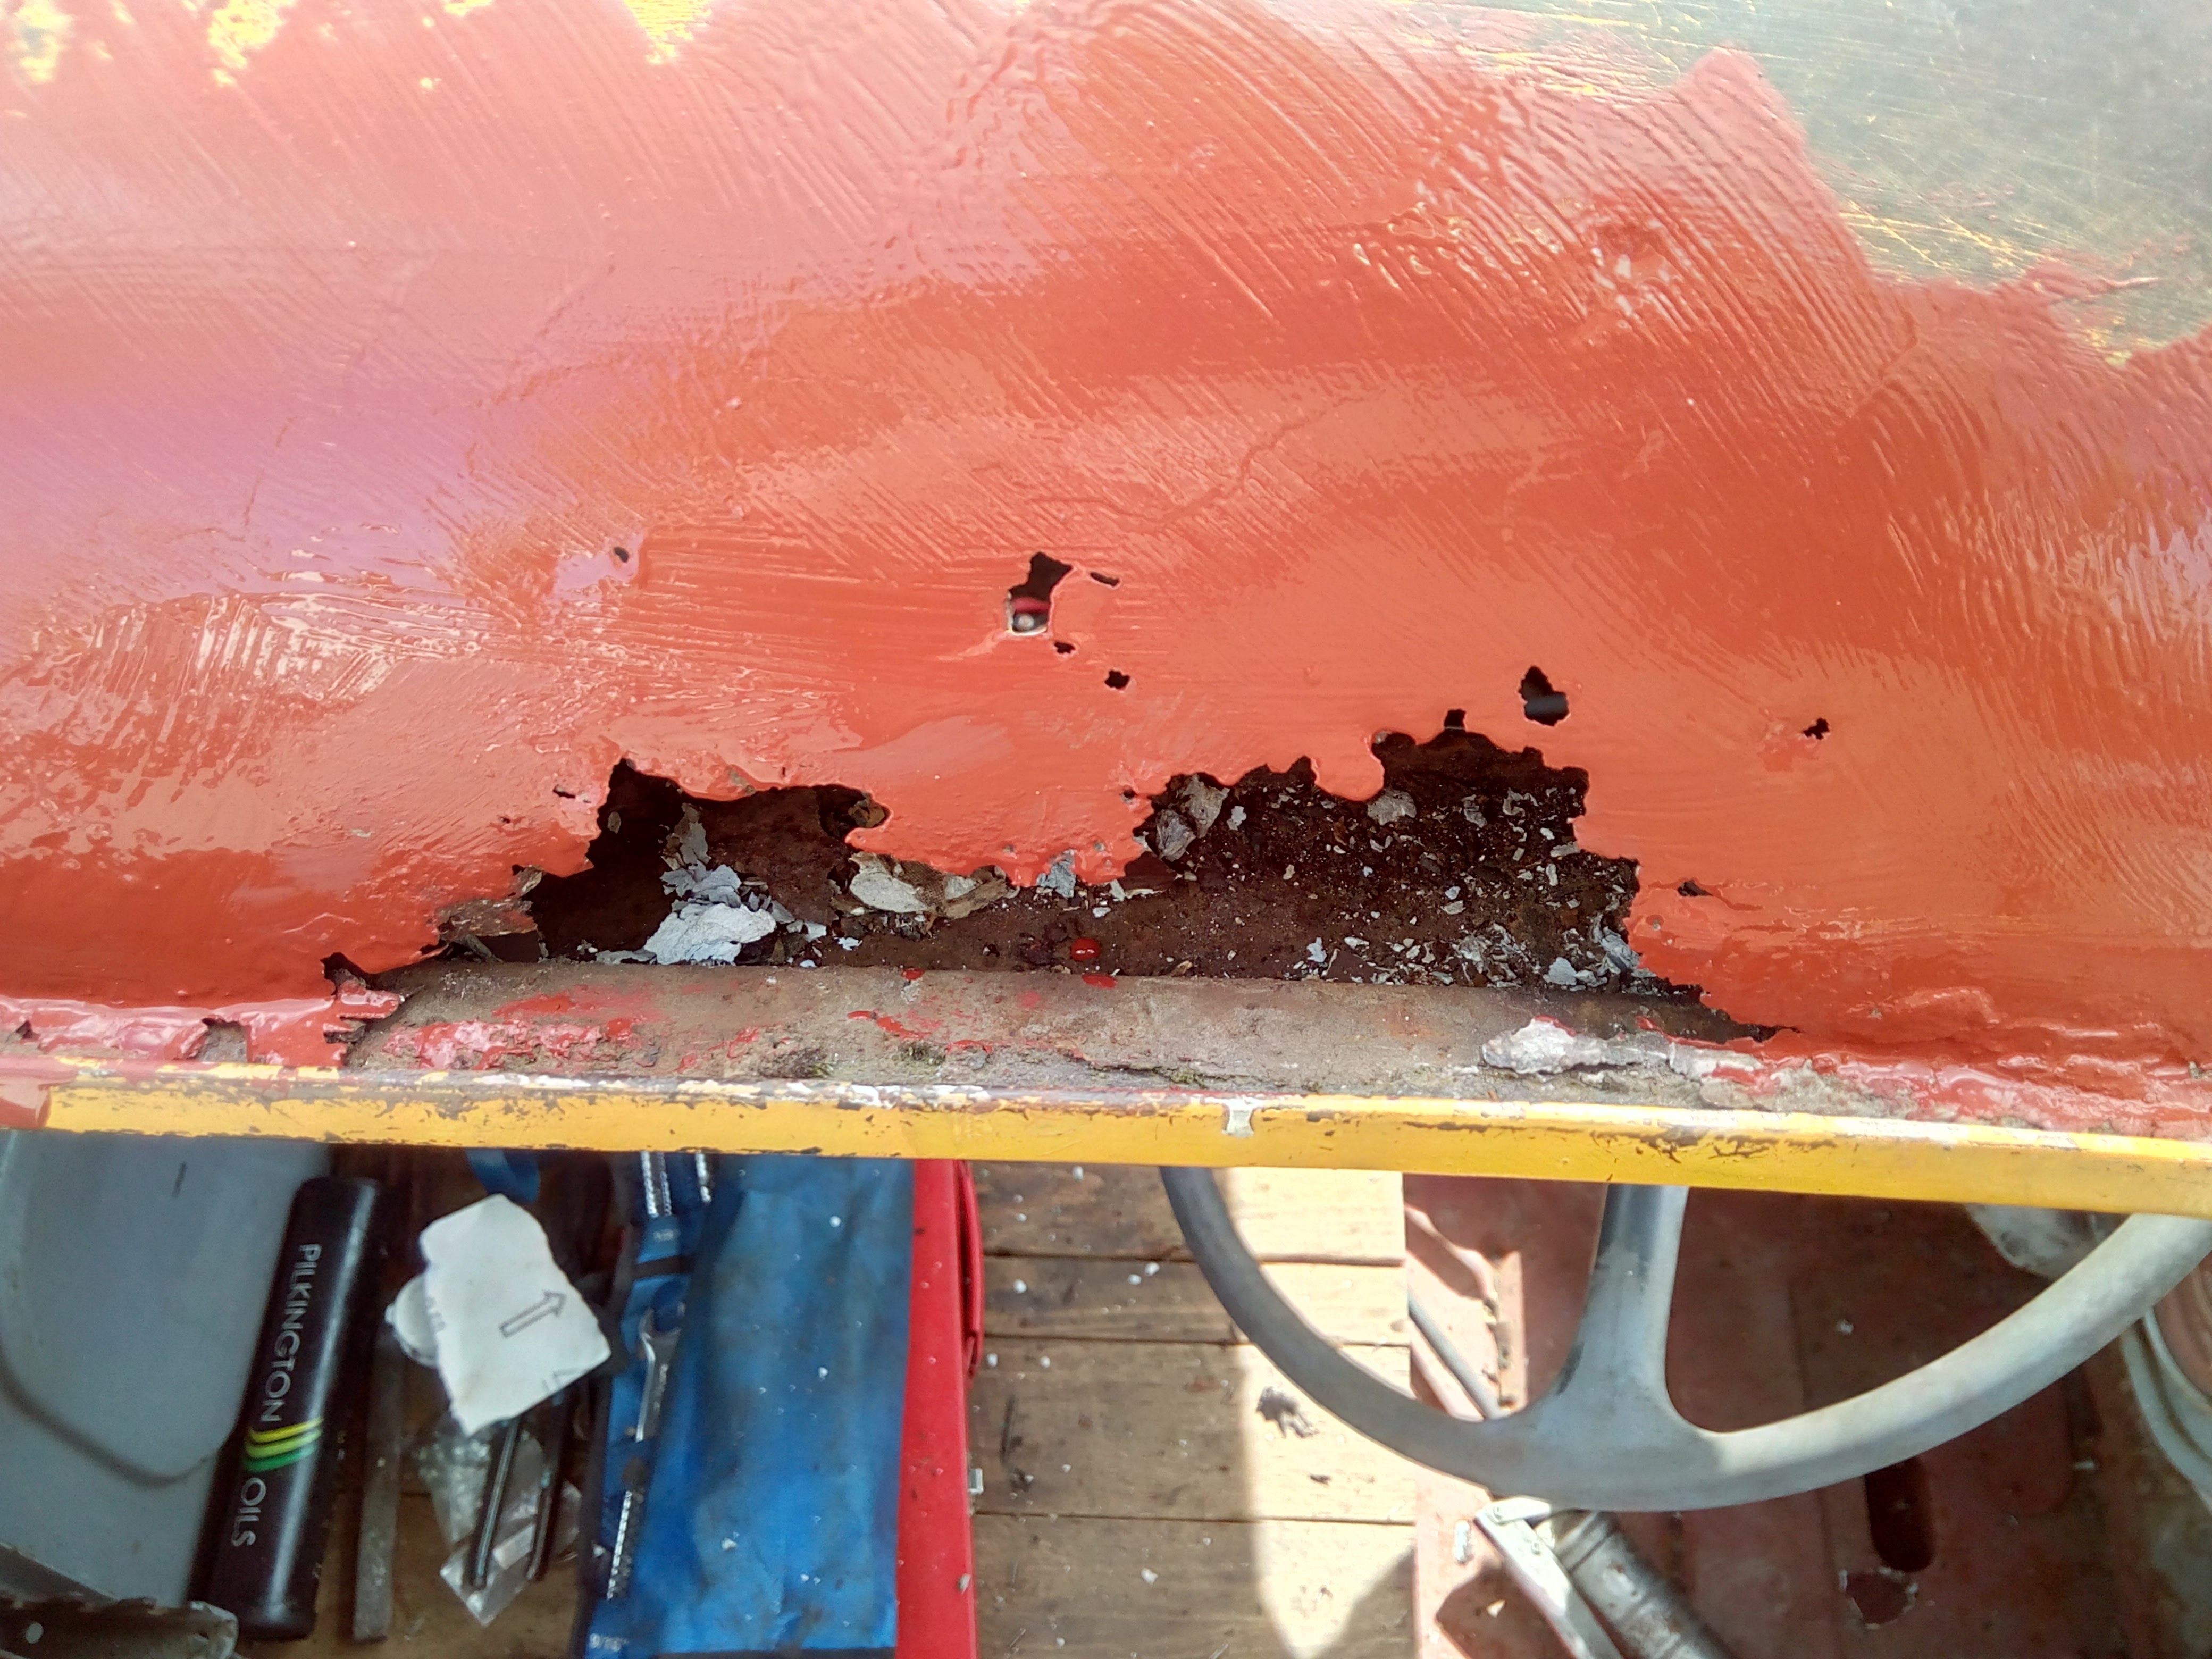 A ragged rusty hole in the truck roof, with bits of old
body-filler and newspaper visible through the hole; the roof has been
roughly painted with some brown-ish primer paint.